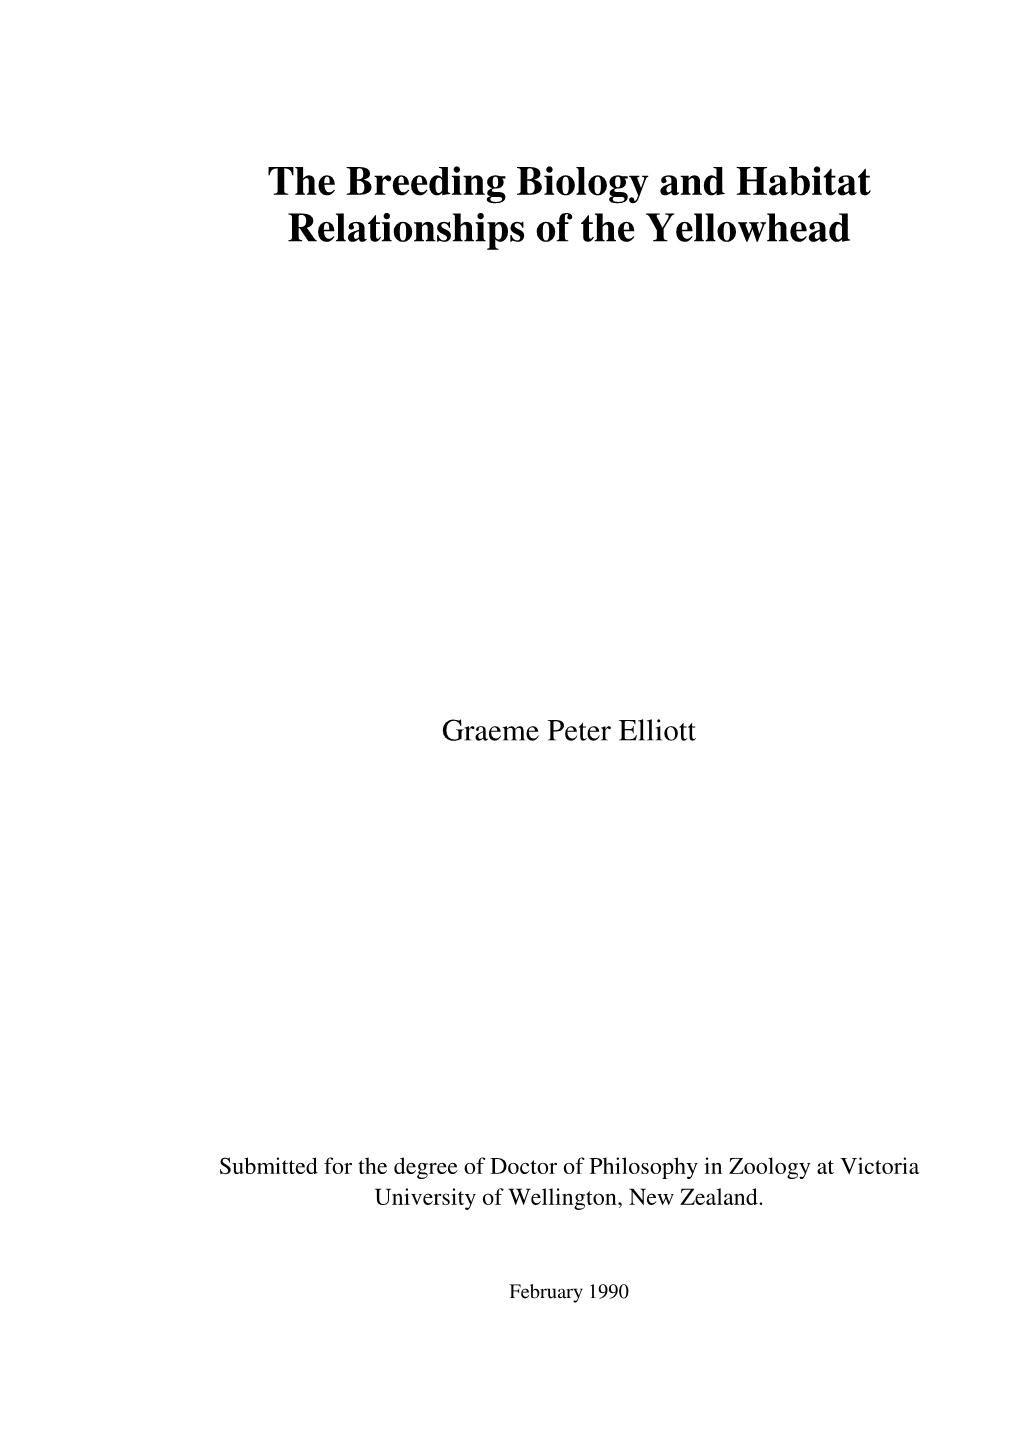 The Breeding Biology and Habitat Relationships of the Yellowhead